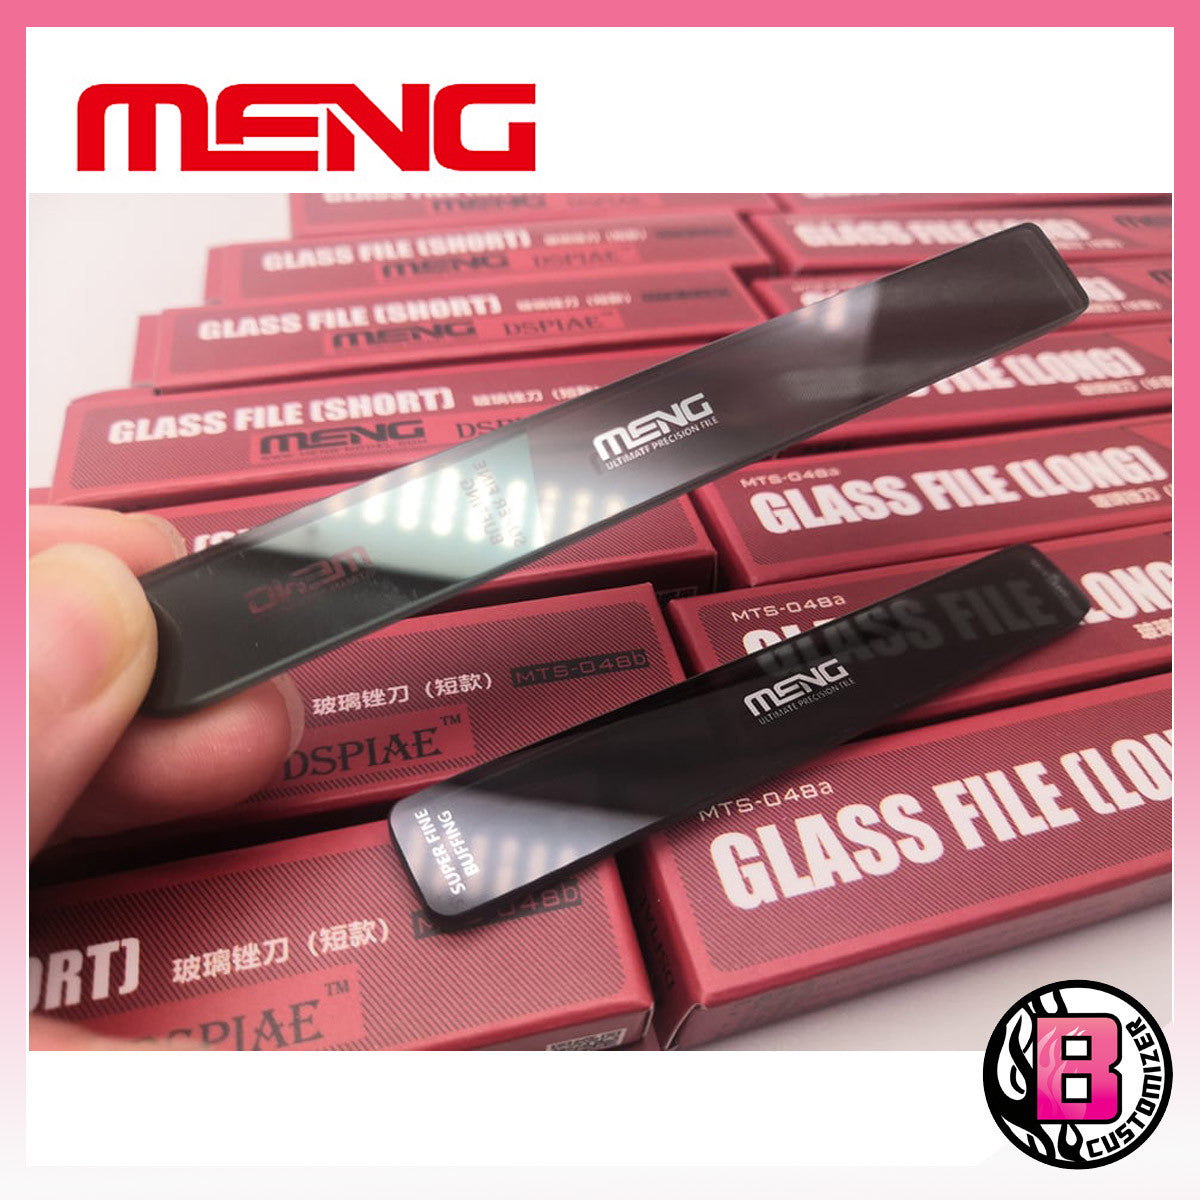 Meng X DSPIAE Glass File MTS-048 (Long / Short)